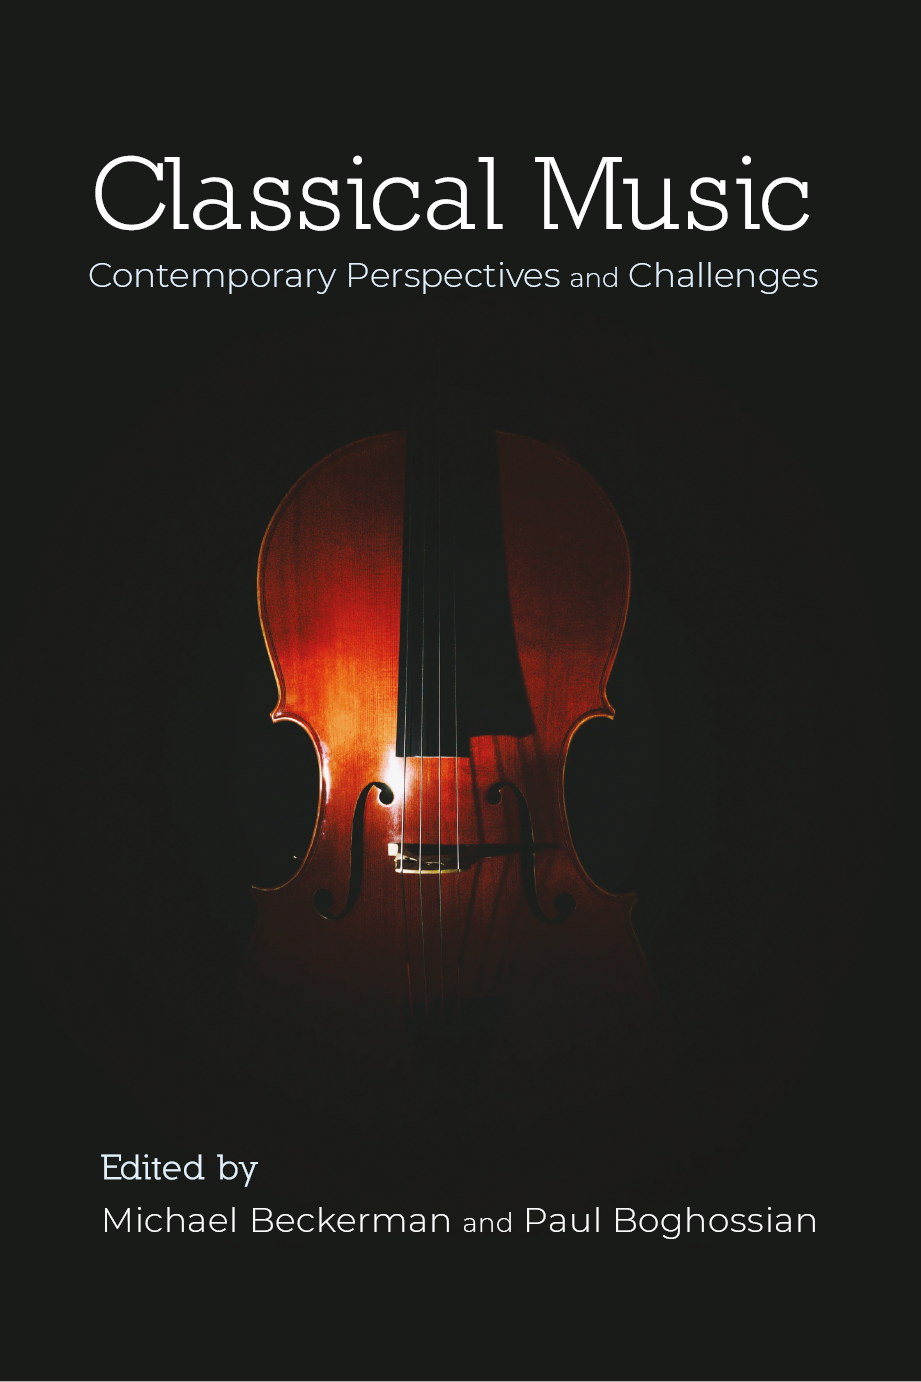 Classical Music book cover image